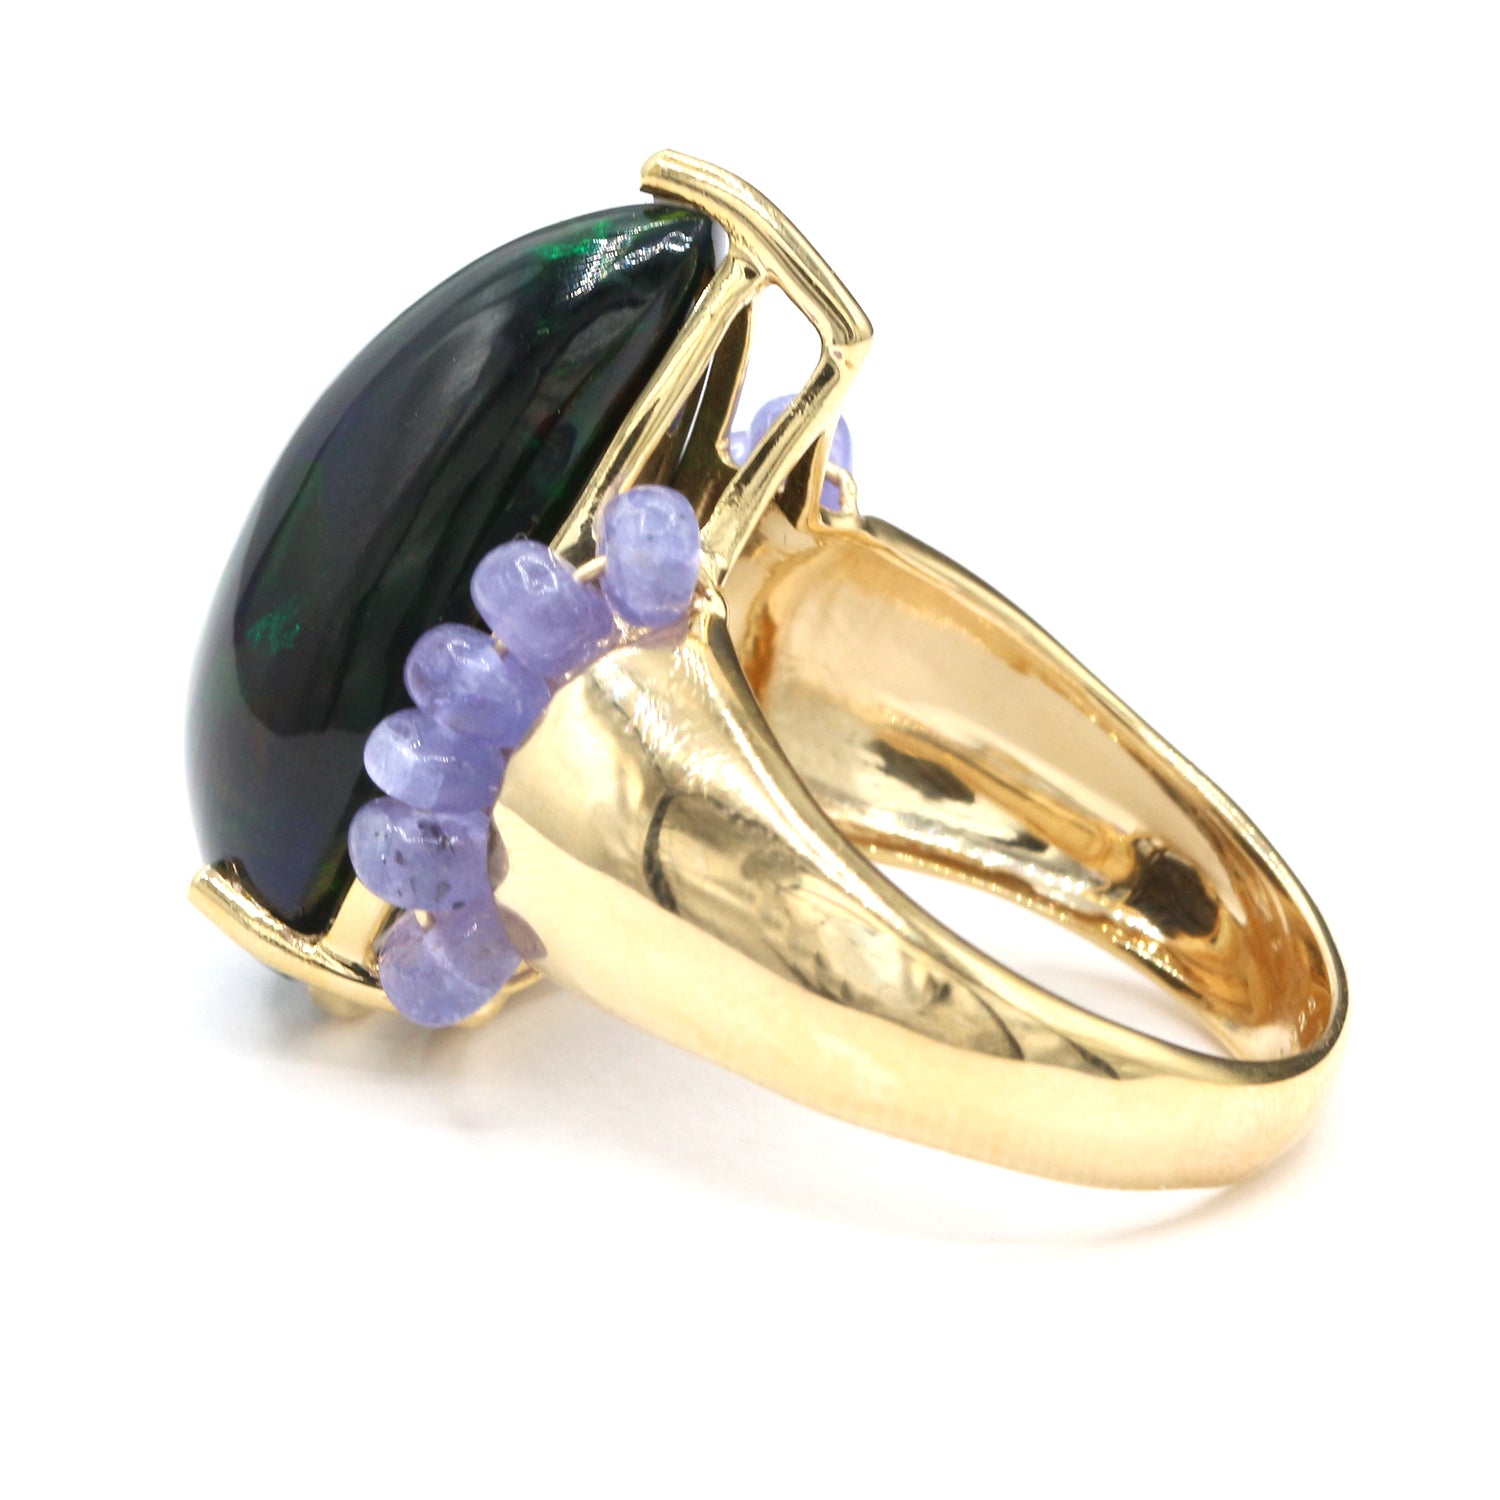 Limited Edition Gems en Vogue Luxe, One-of-a-Kind 12.22ctw Black Opal & Tanzanite Ring